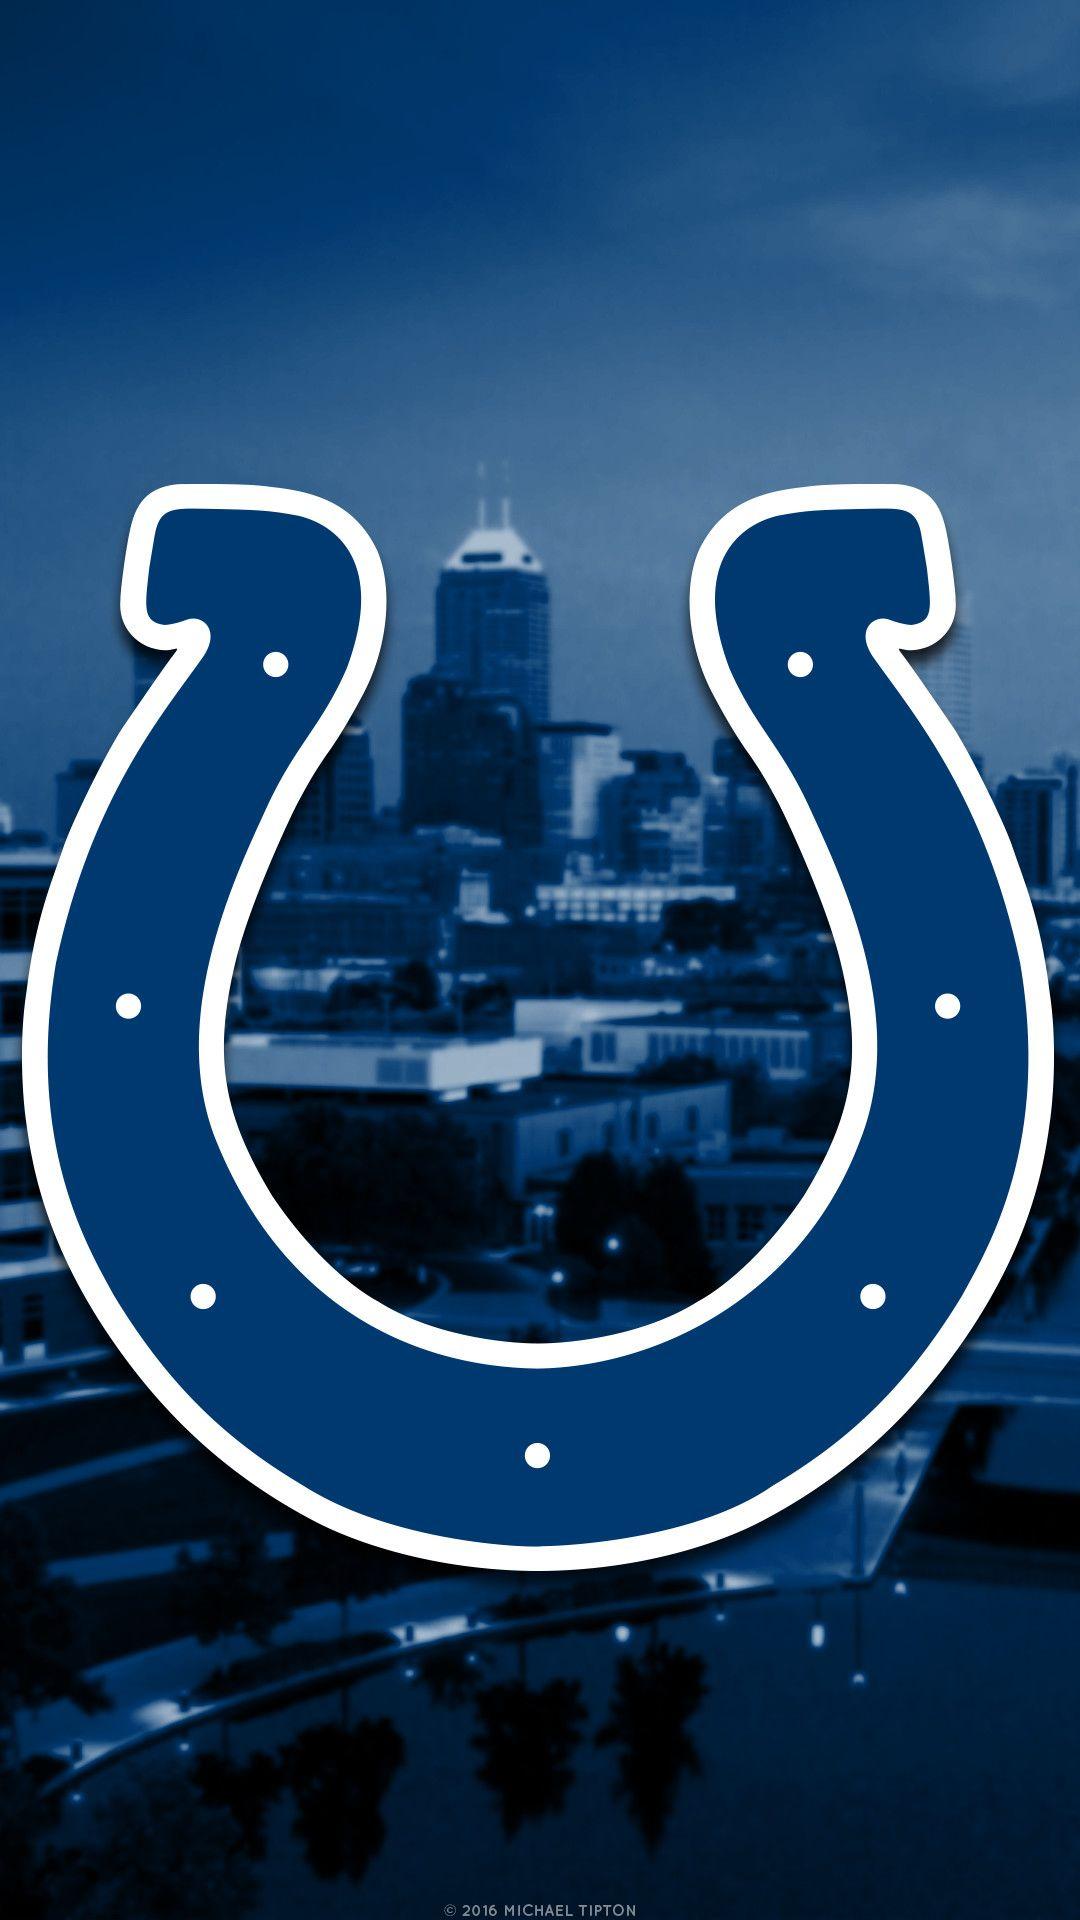 Indianapolis Colts 2018 Wallpapers - Wallpaper Cave